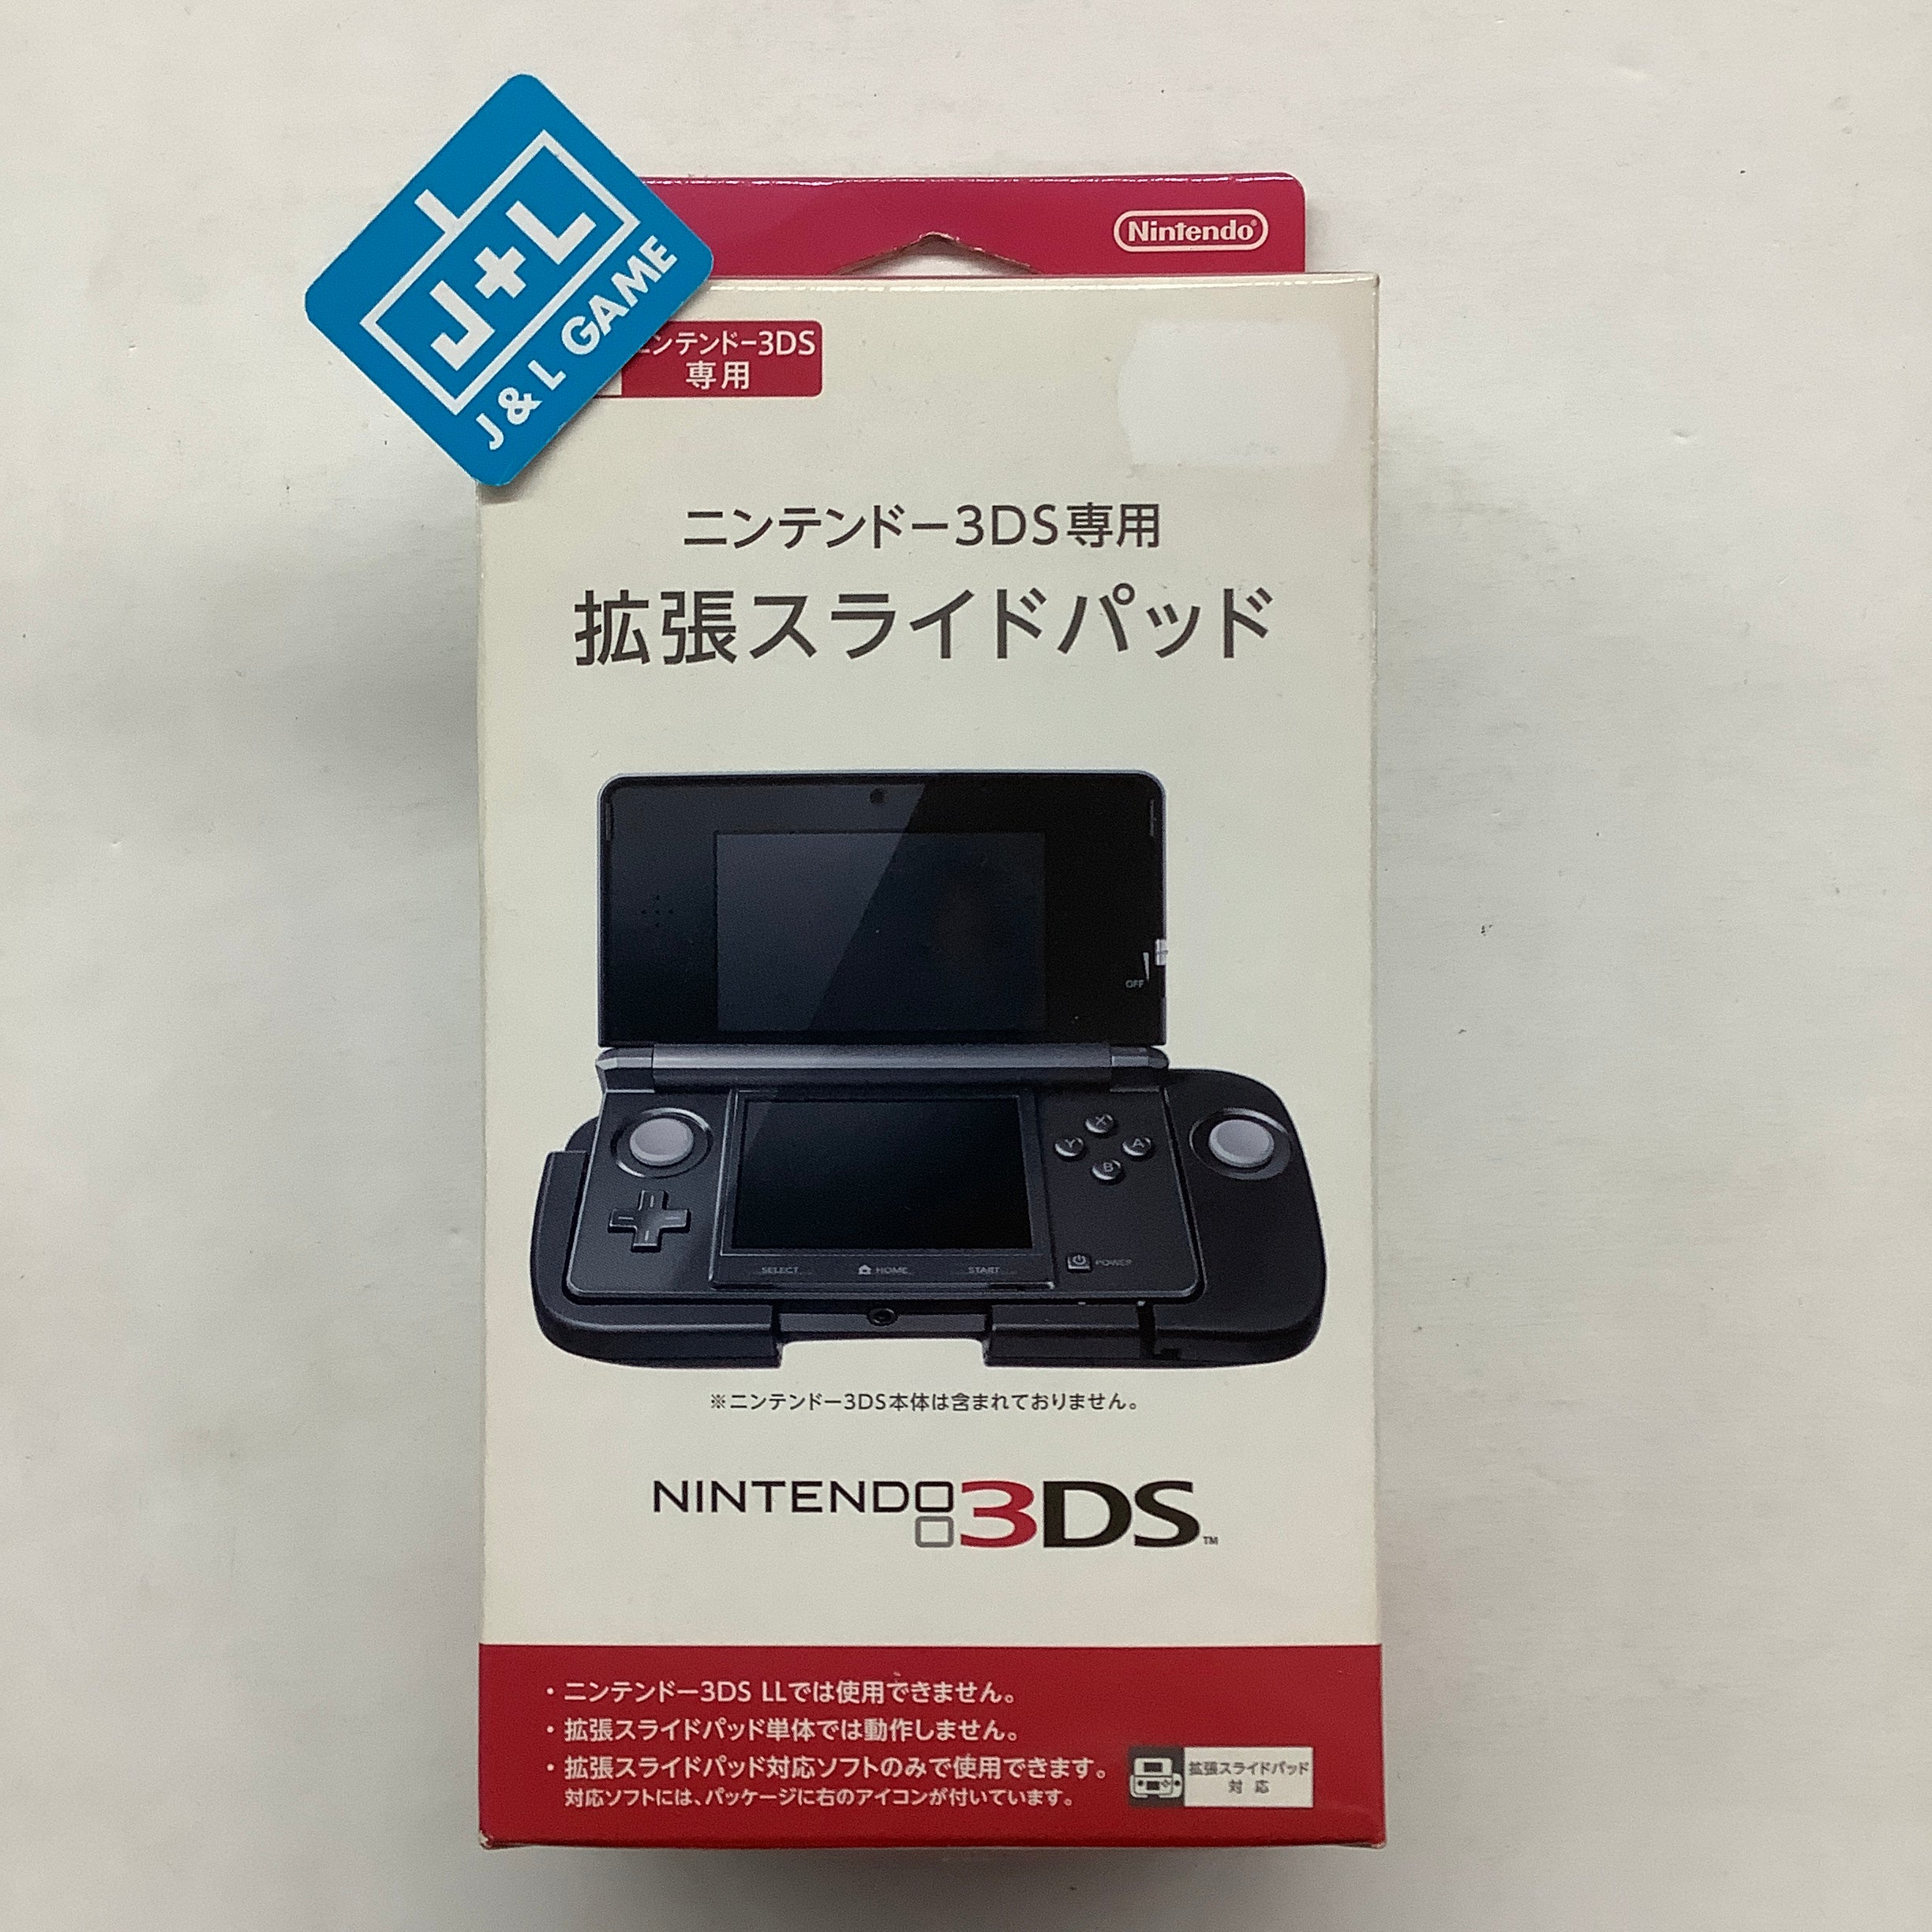 Nintendo 3DS Circle Pad  Extended Slide Pad - Nintendo 3DS (Japanese Import) Accessories Nintendo   